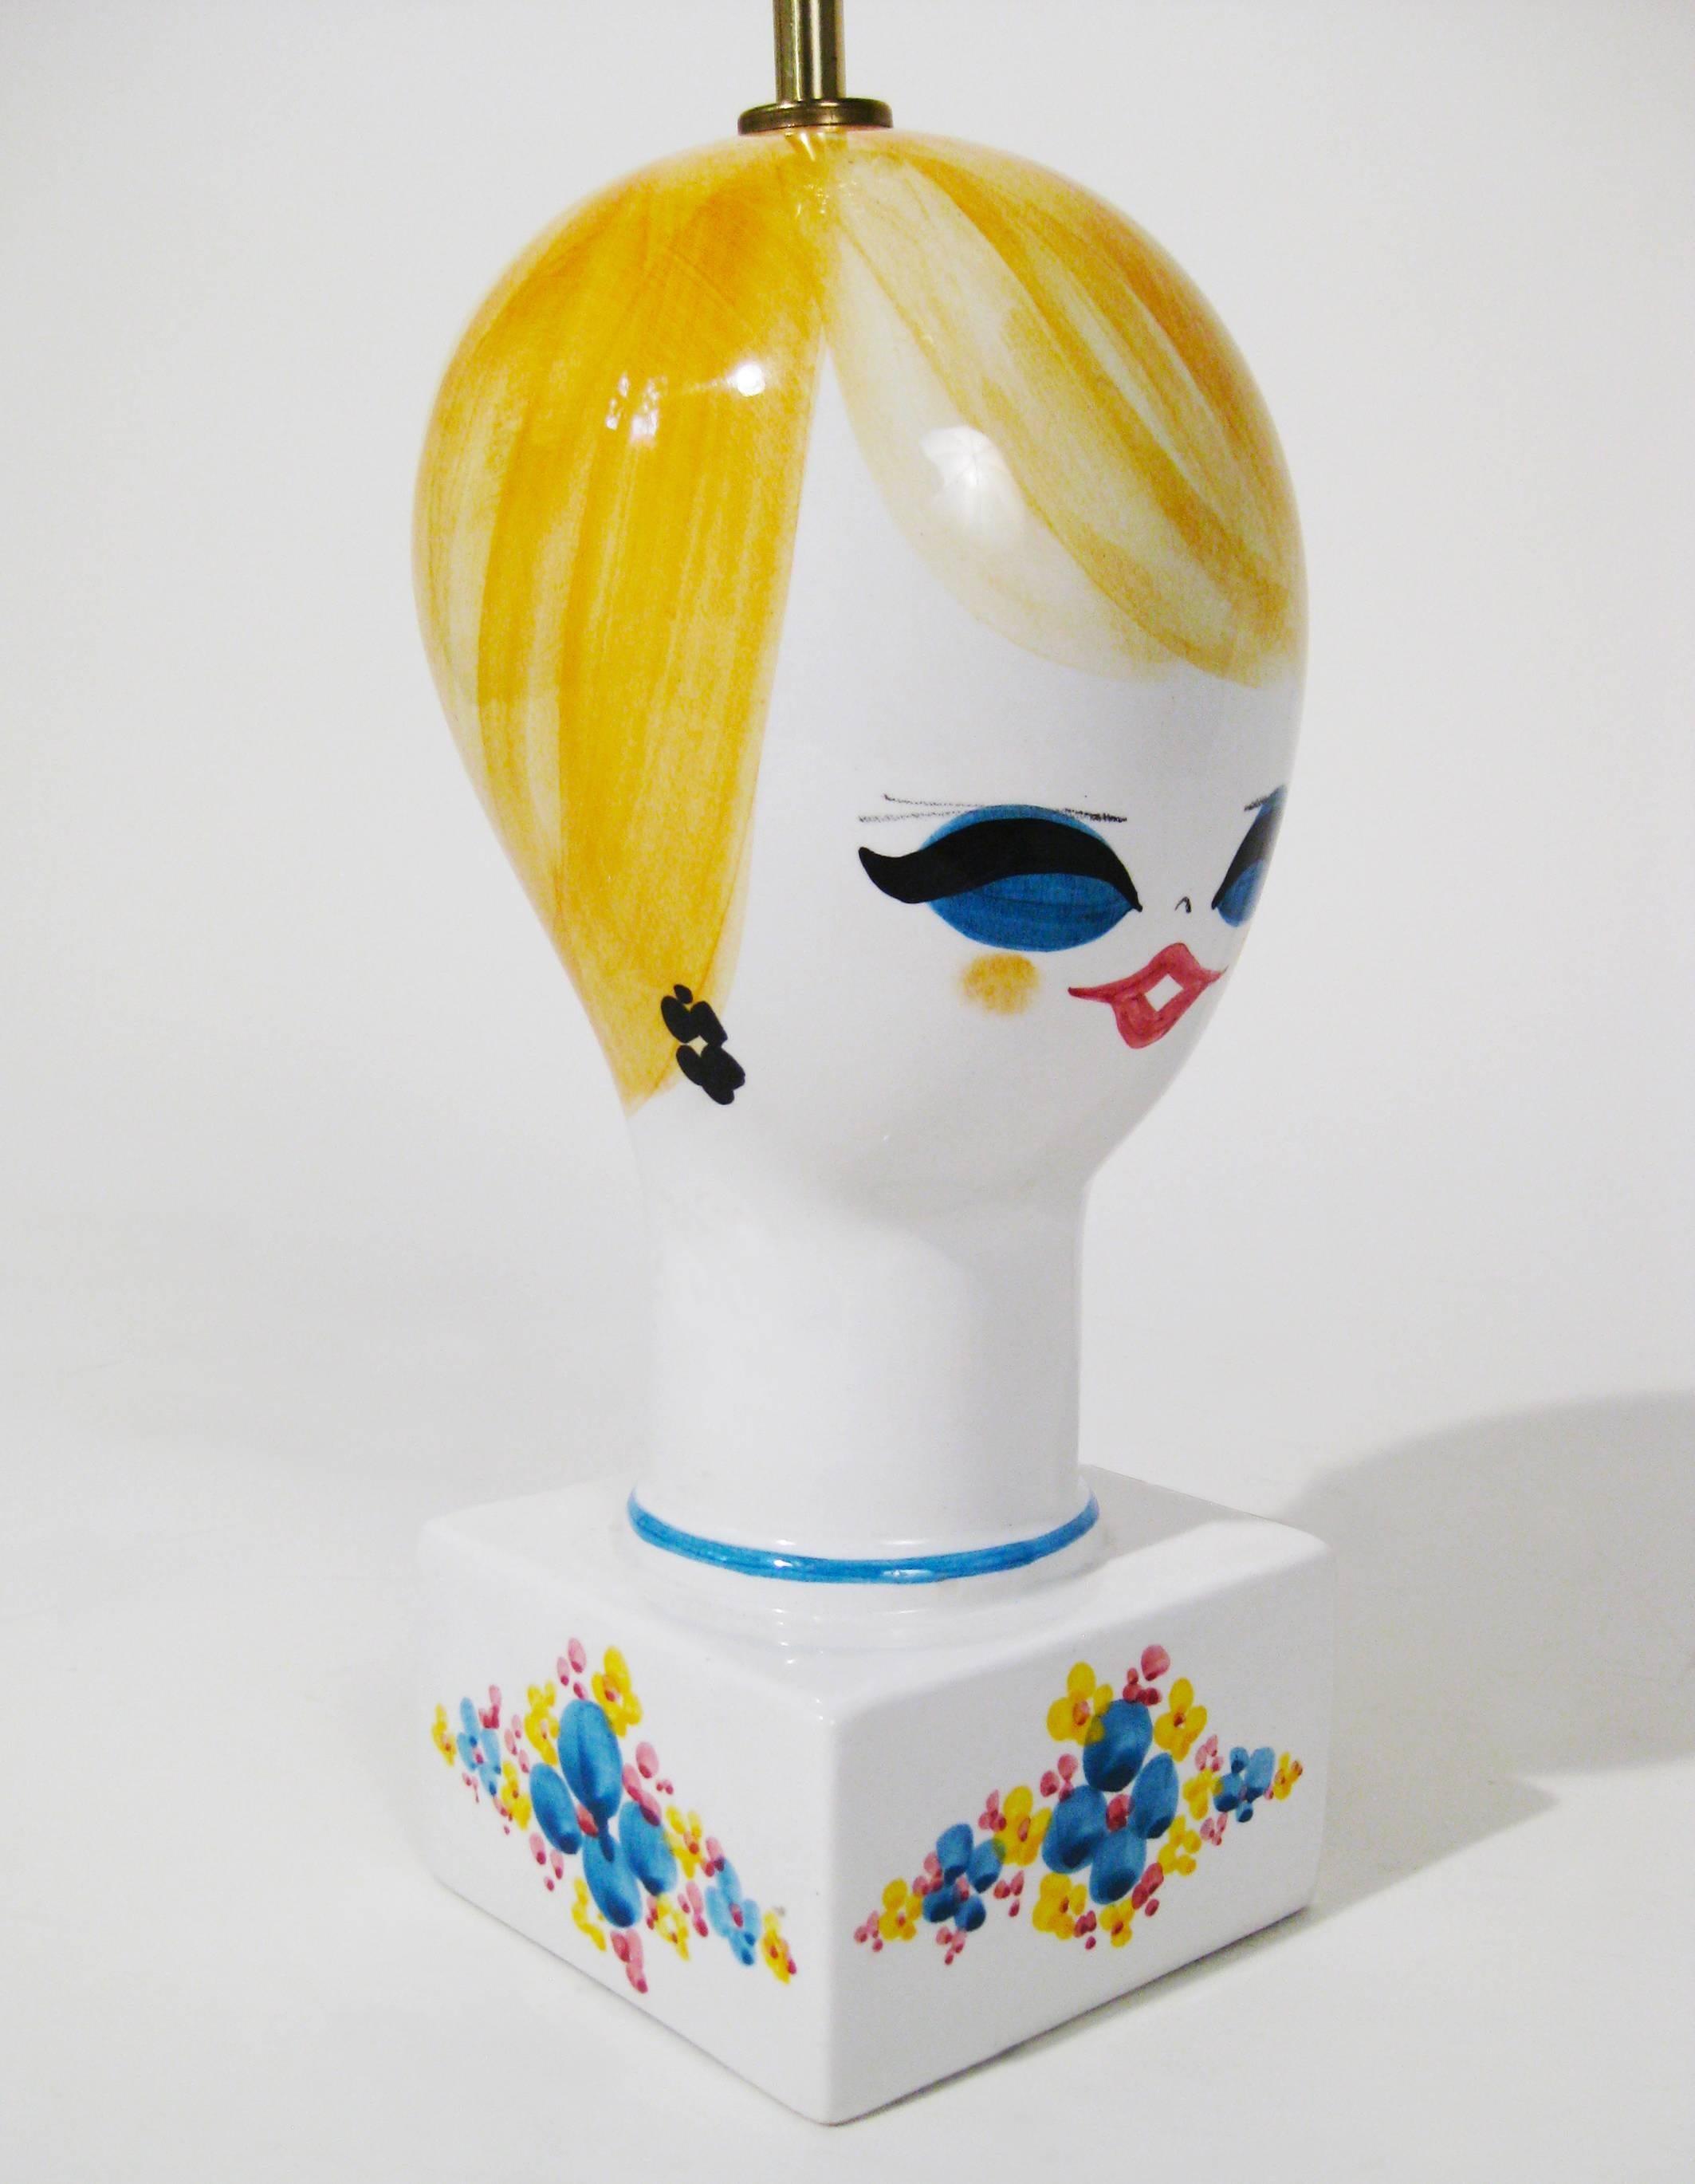 This stylized bust of glazed pottery reminds us of the trends of the late 1960s and early 1970s: black eyeliner, false eyelashes, and eye-catching lipstick. Charming piece that captures not only the fashion trends of the era, but the spirit of